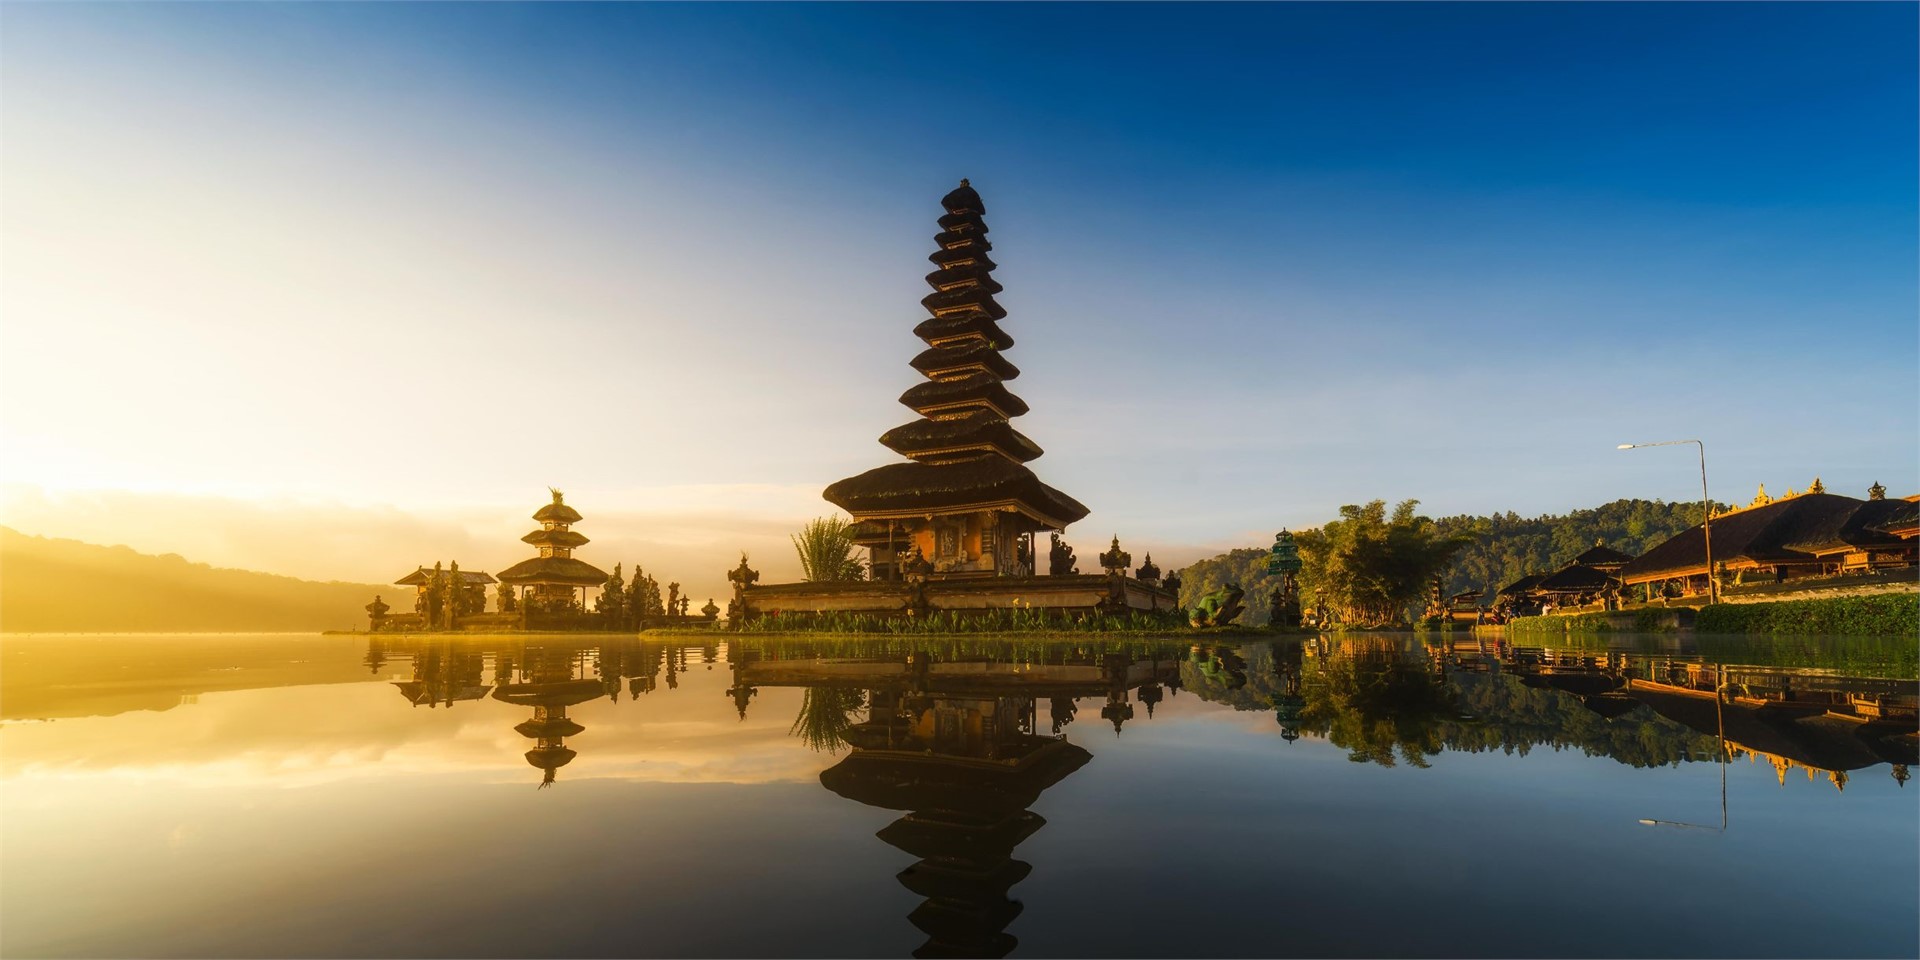 Hotels and accommodation in Bali, Indonesia